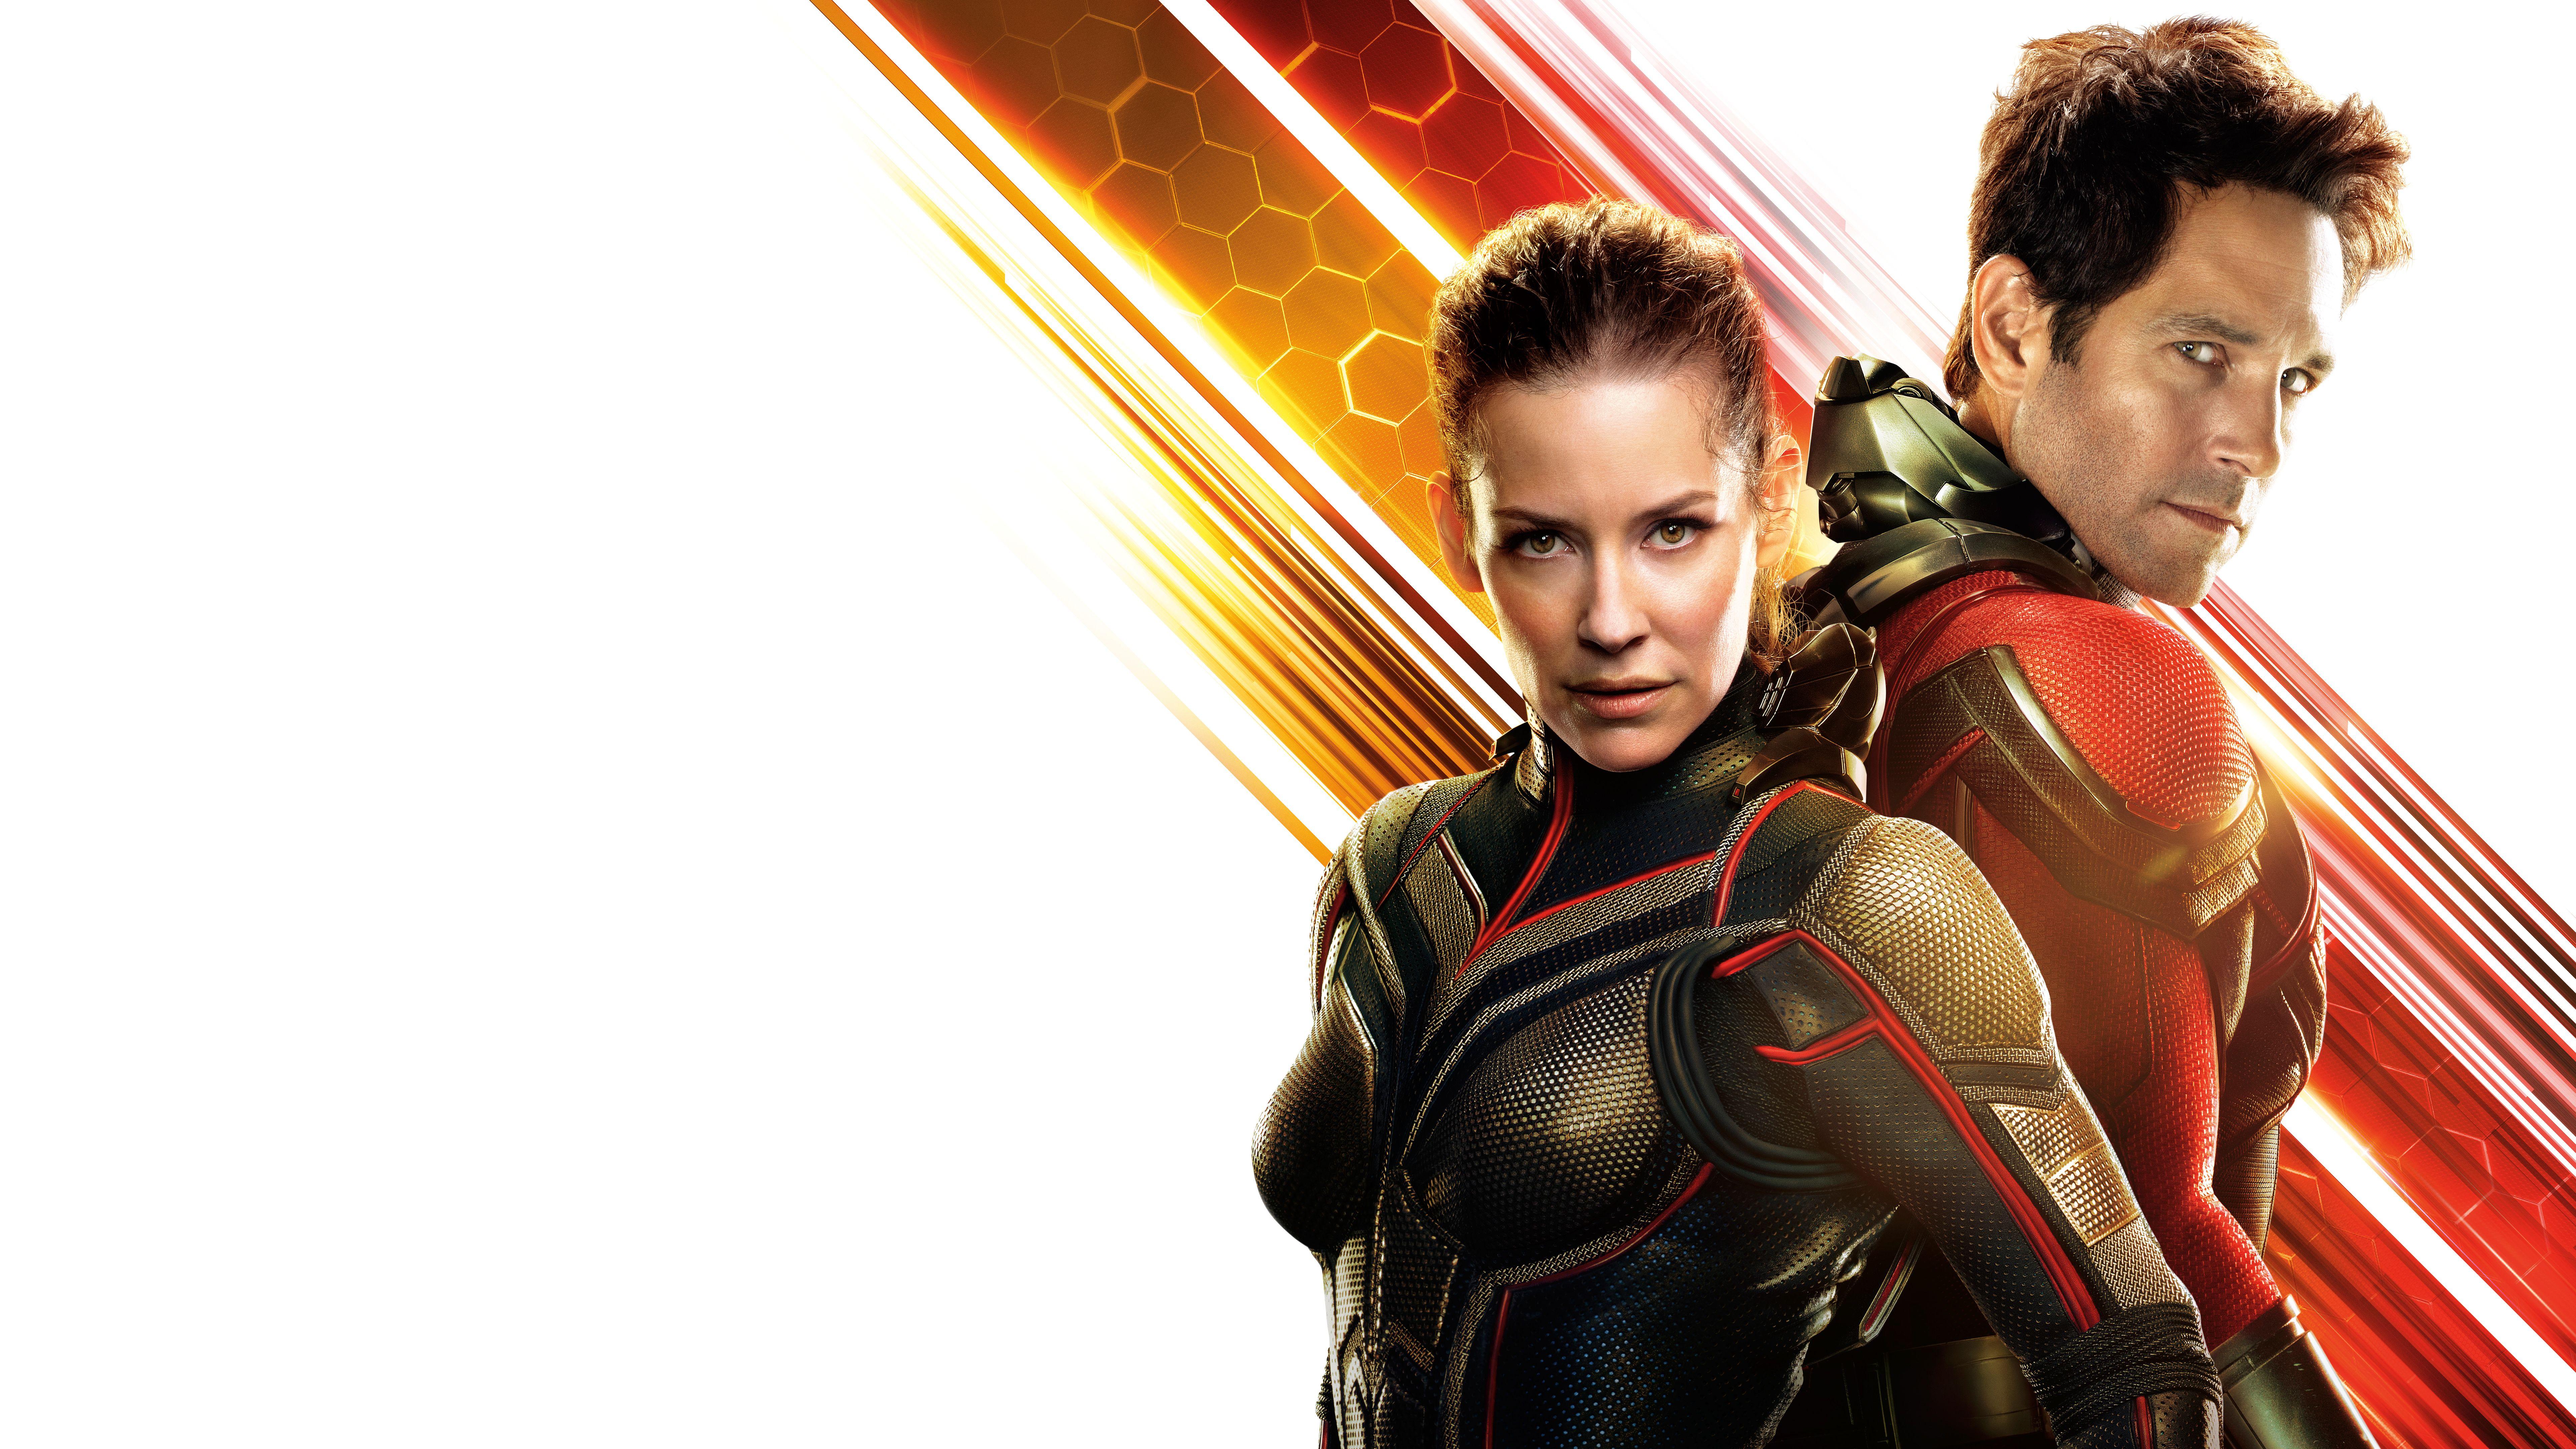 Wallpaper Ant Man And The Wasp, Evangeline Lilly, Paul Rudd